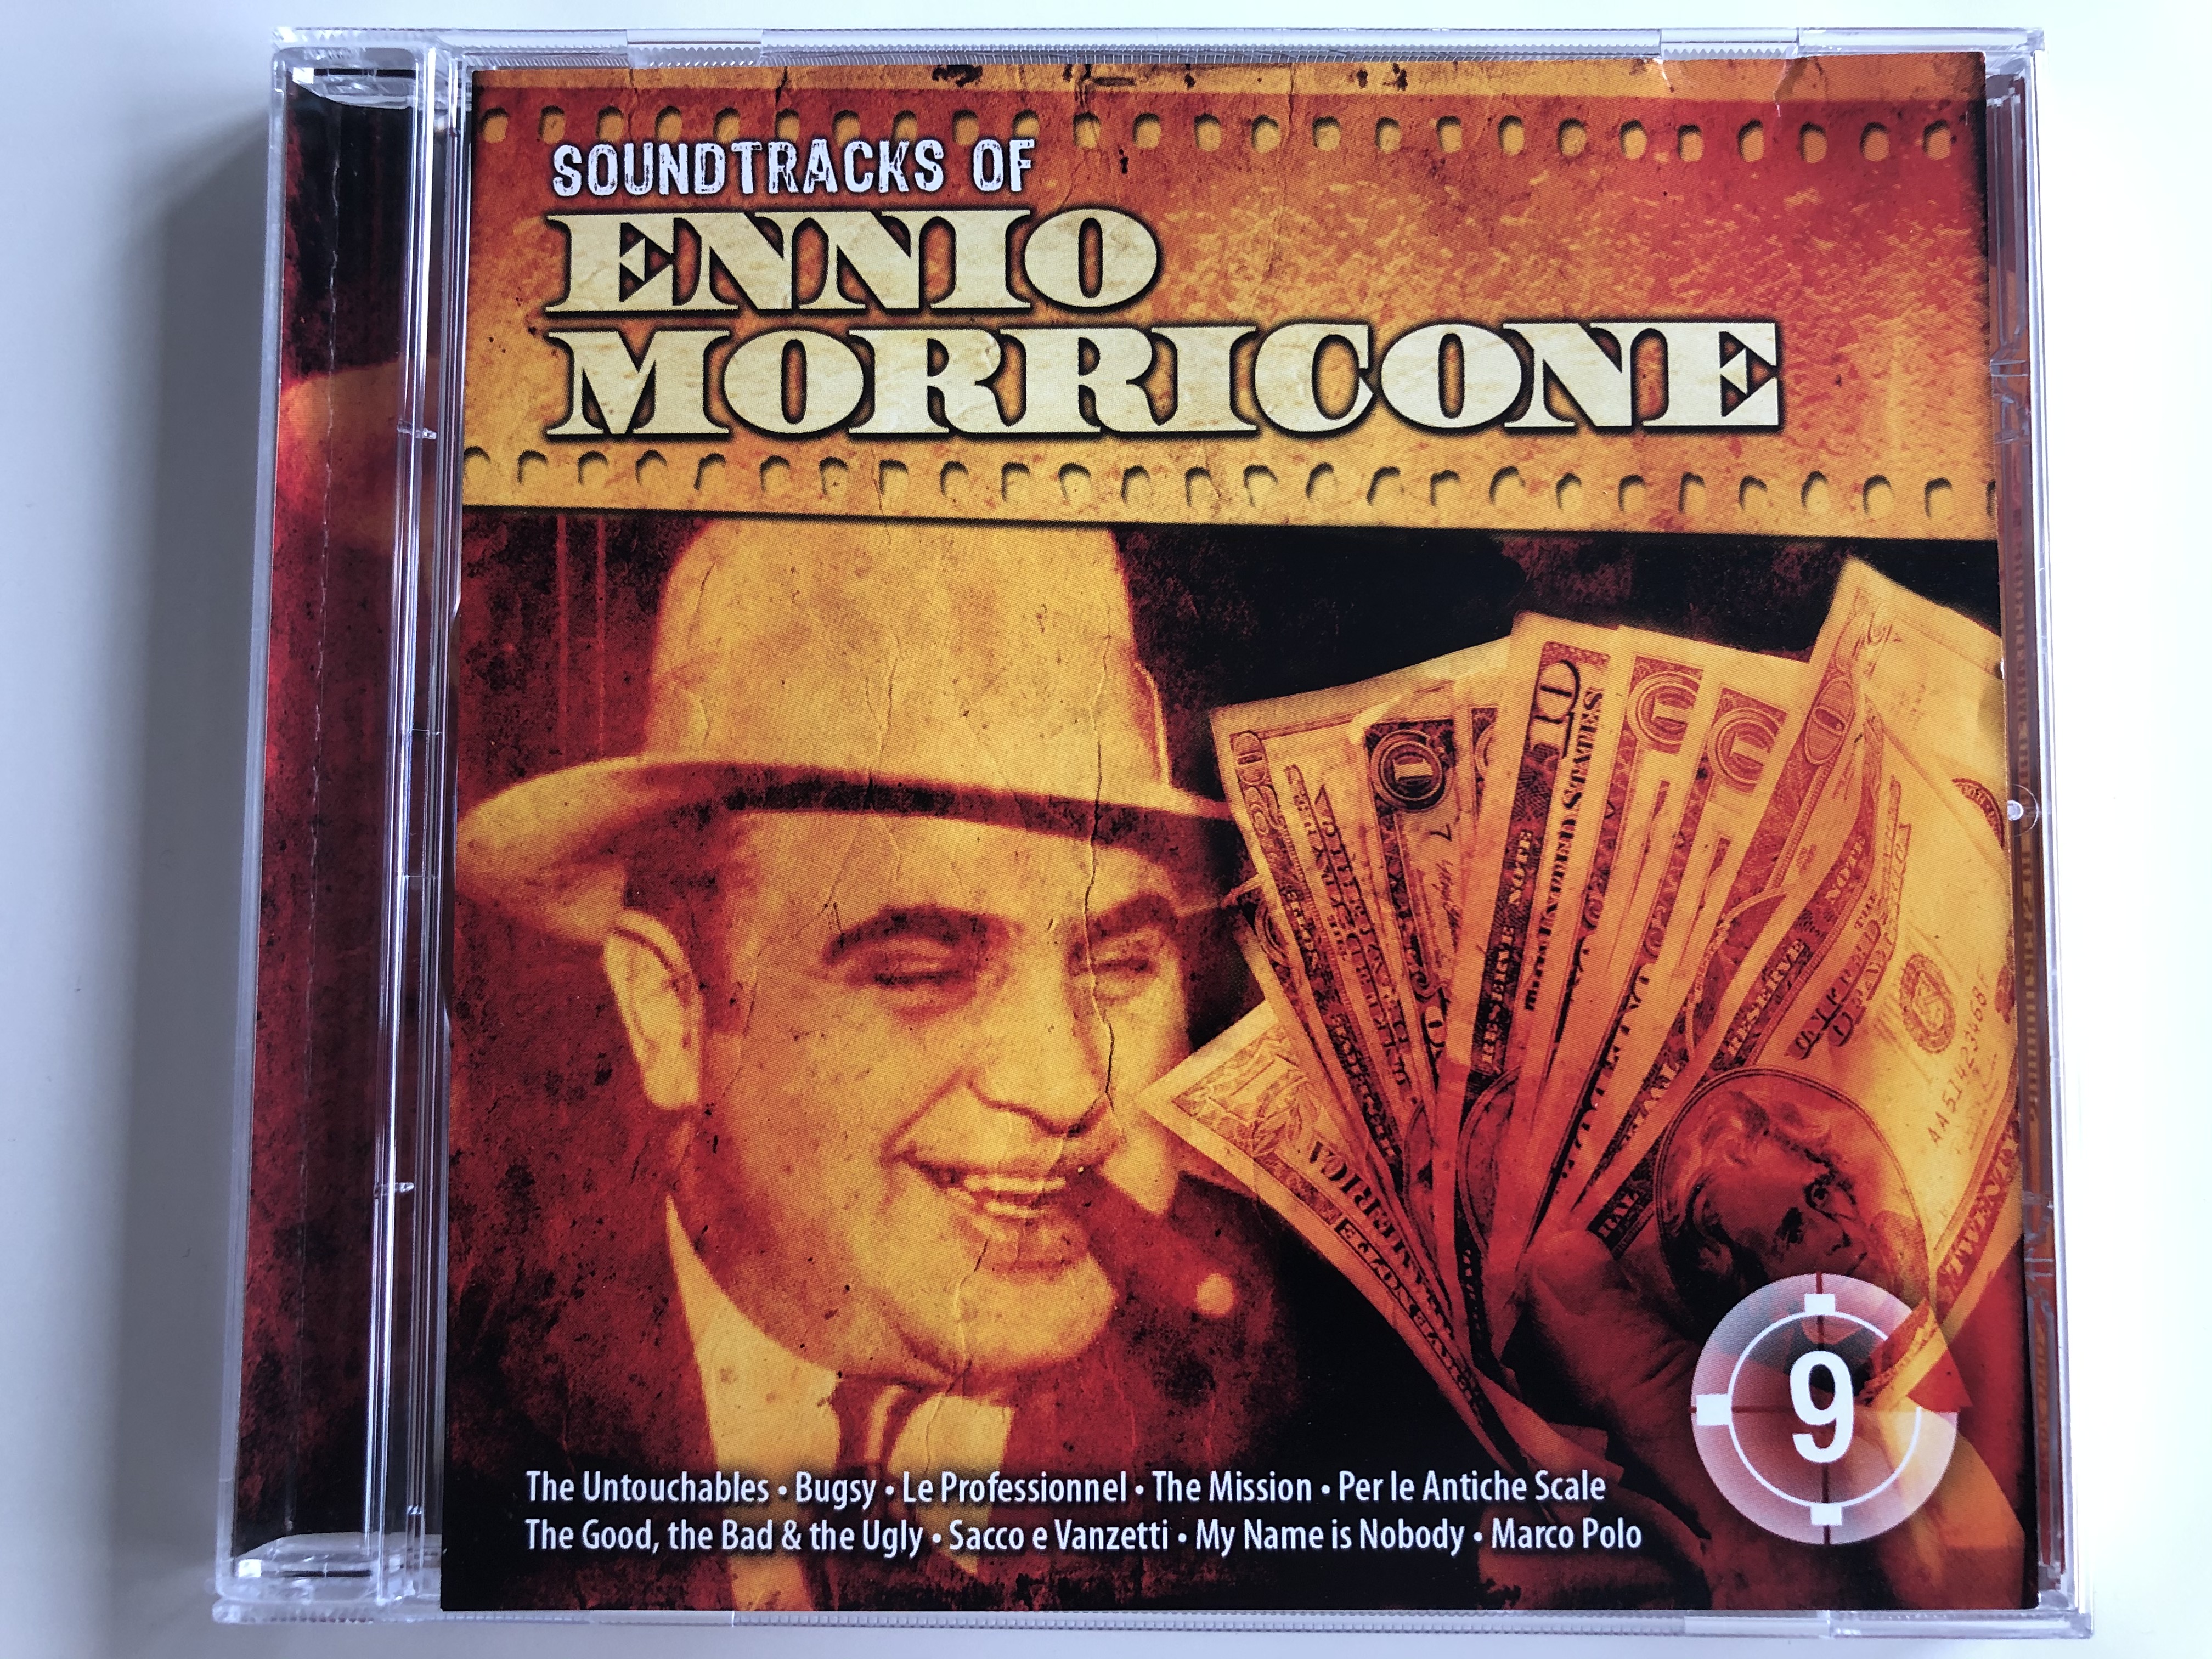 soundtracks-of-ennio-morricone-the-untouchables-bugsy-le-professionnel-the-mission-per-le-antiche-scale-the-good-the-bad-the-ugly-sacco-e-vanzetti-my-name-is-nobody-marco-polo-s.-c.-ar-1-.jpg